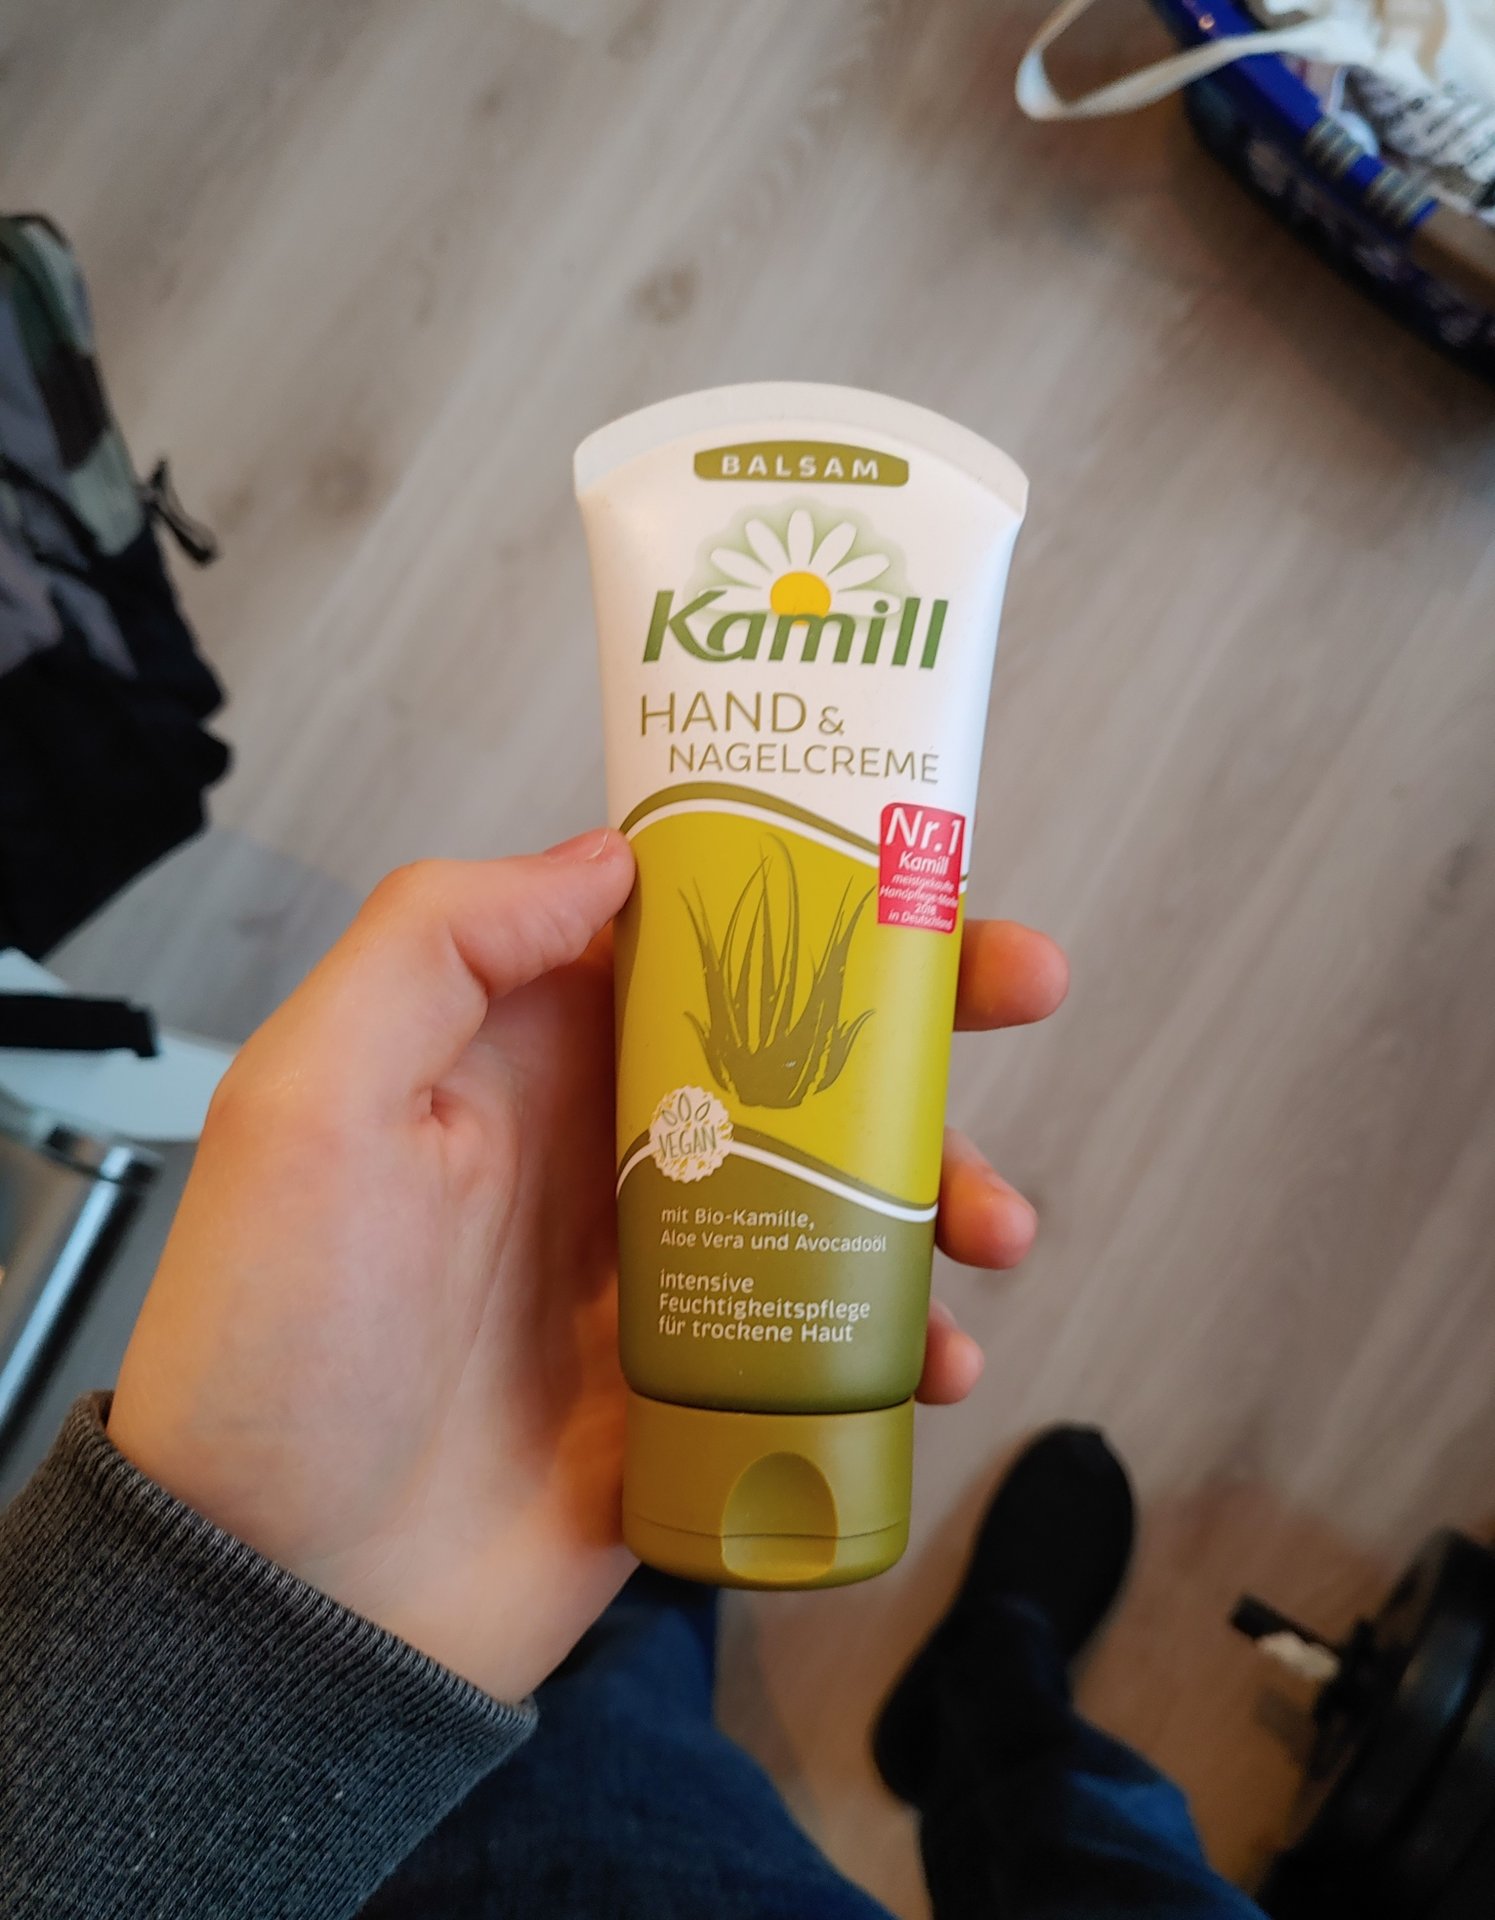 Kamill Kamill Hand & Nagelcreme Balsam Review | abillion